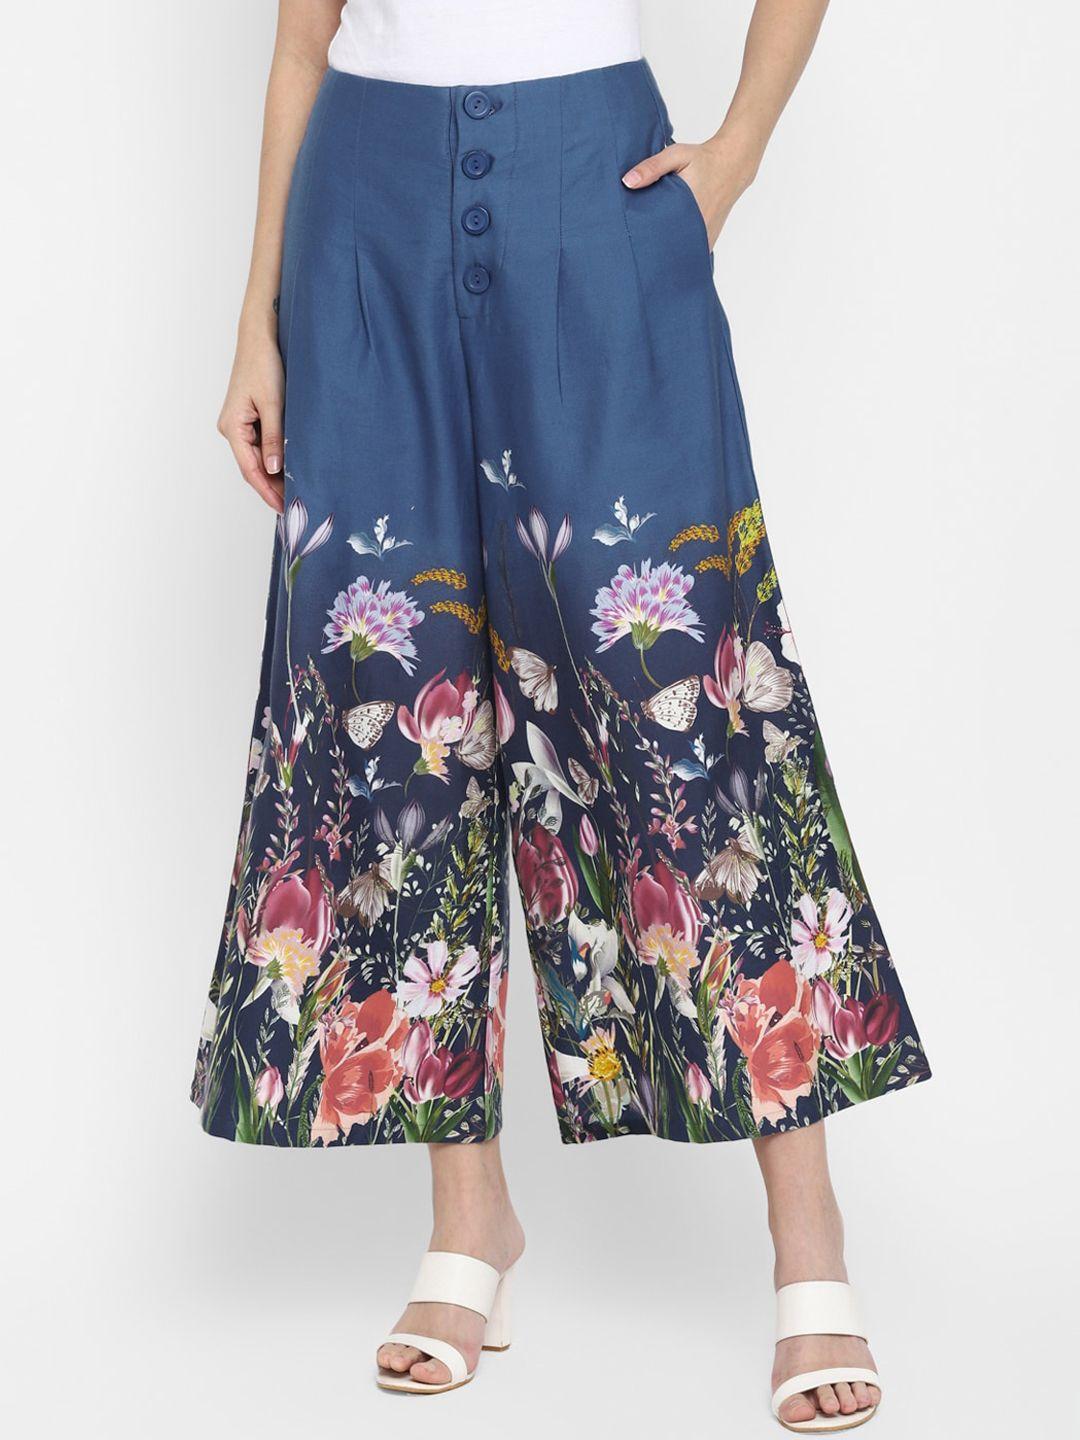 blanc9-women-navy-blue-floral-printed-loose-fit-culottes-trousers